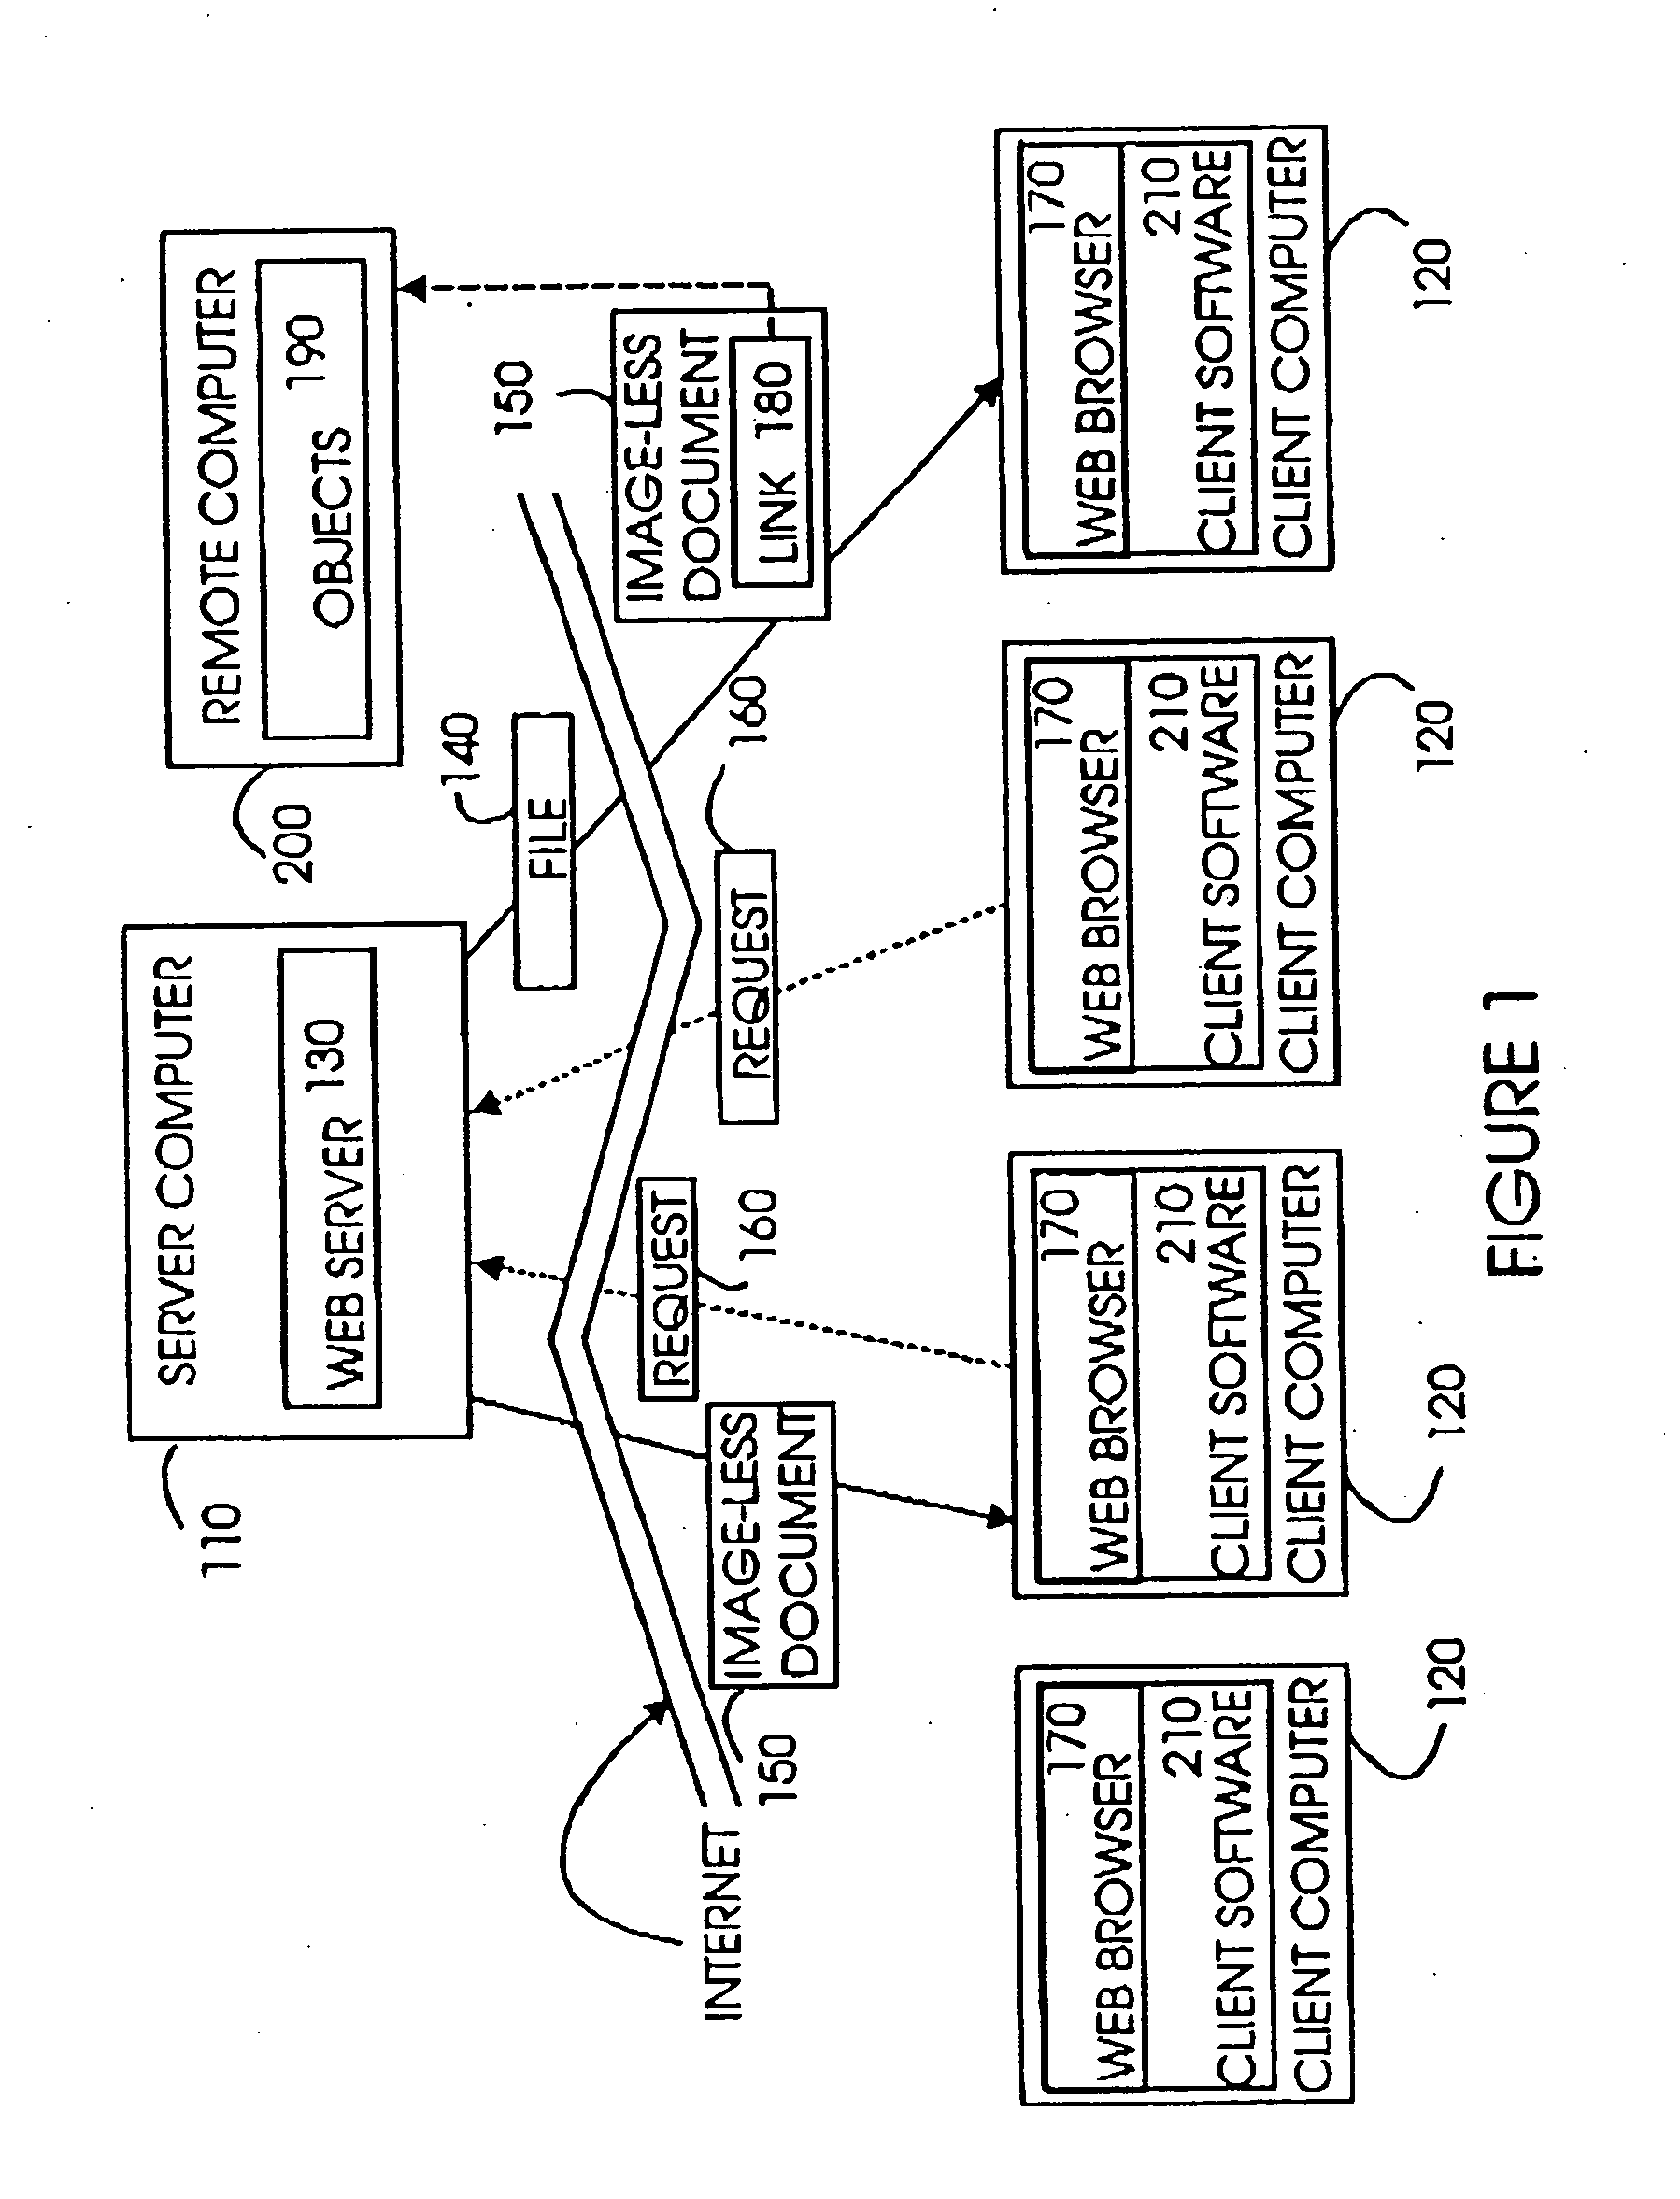 Method and system for viewing scalable documents